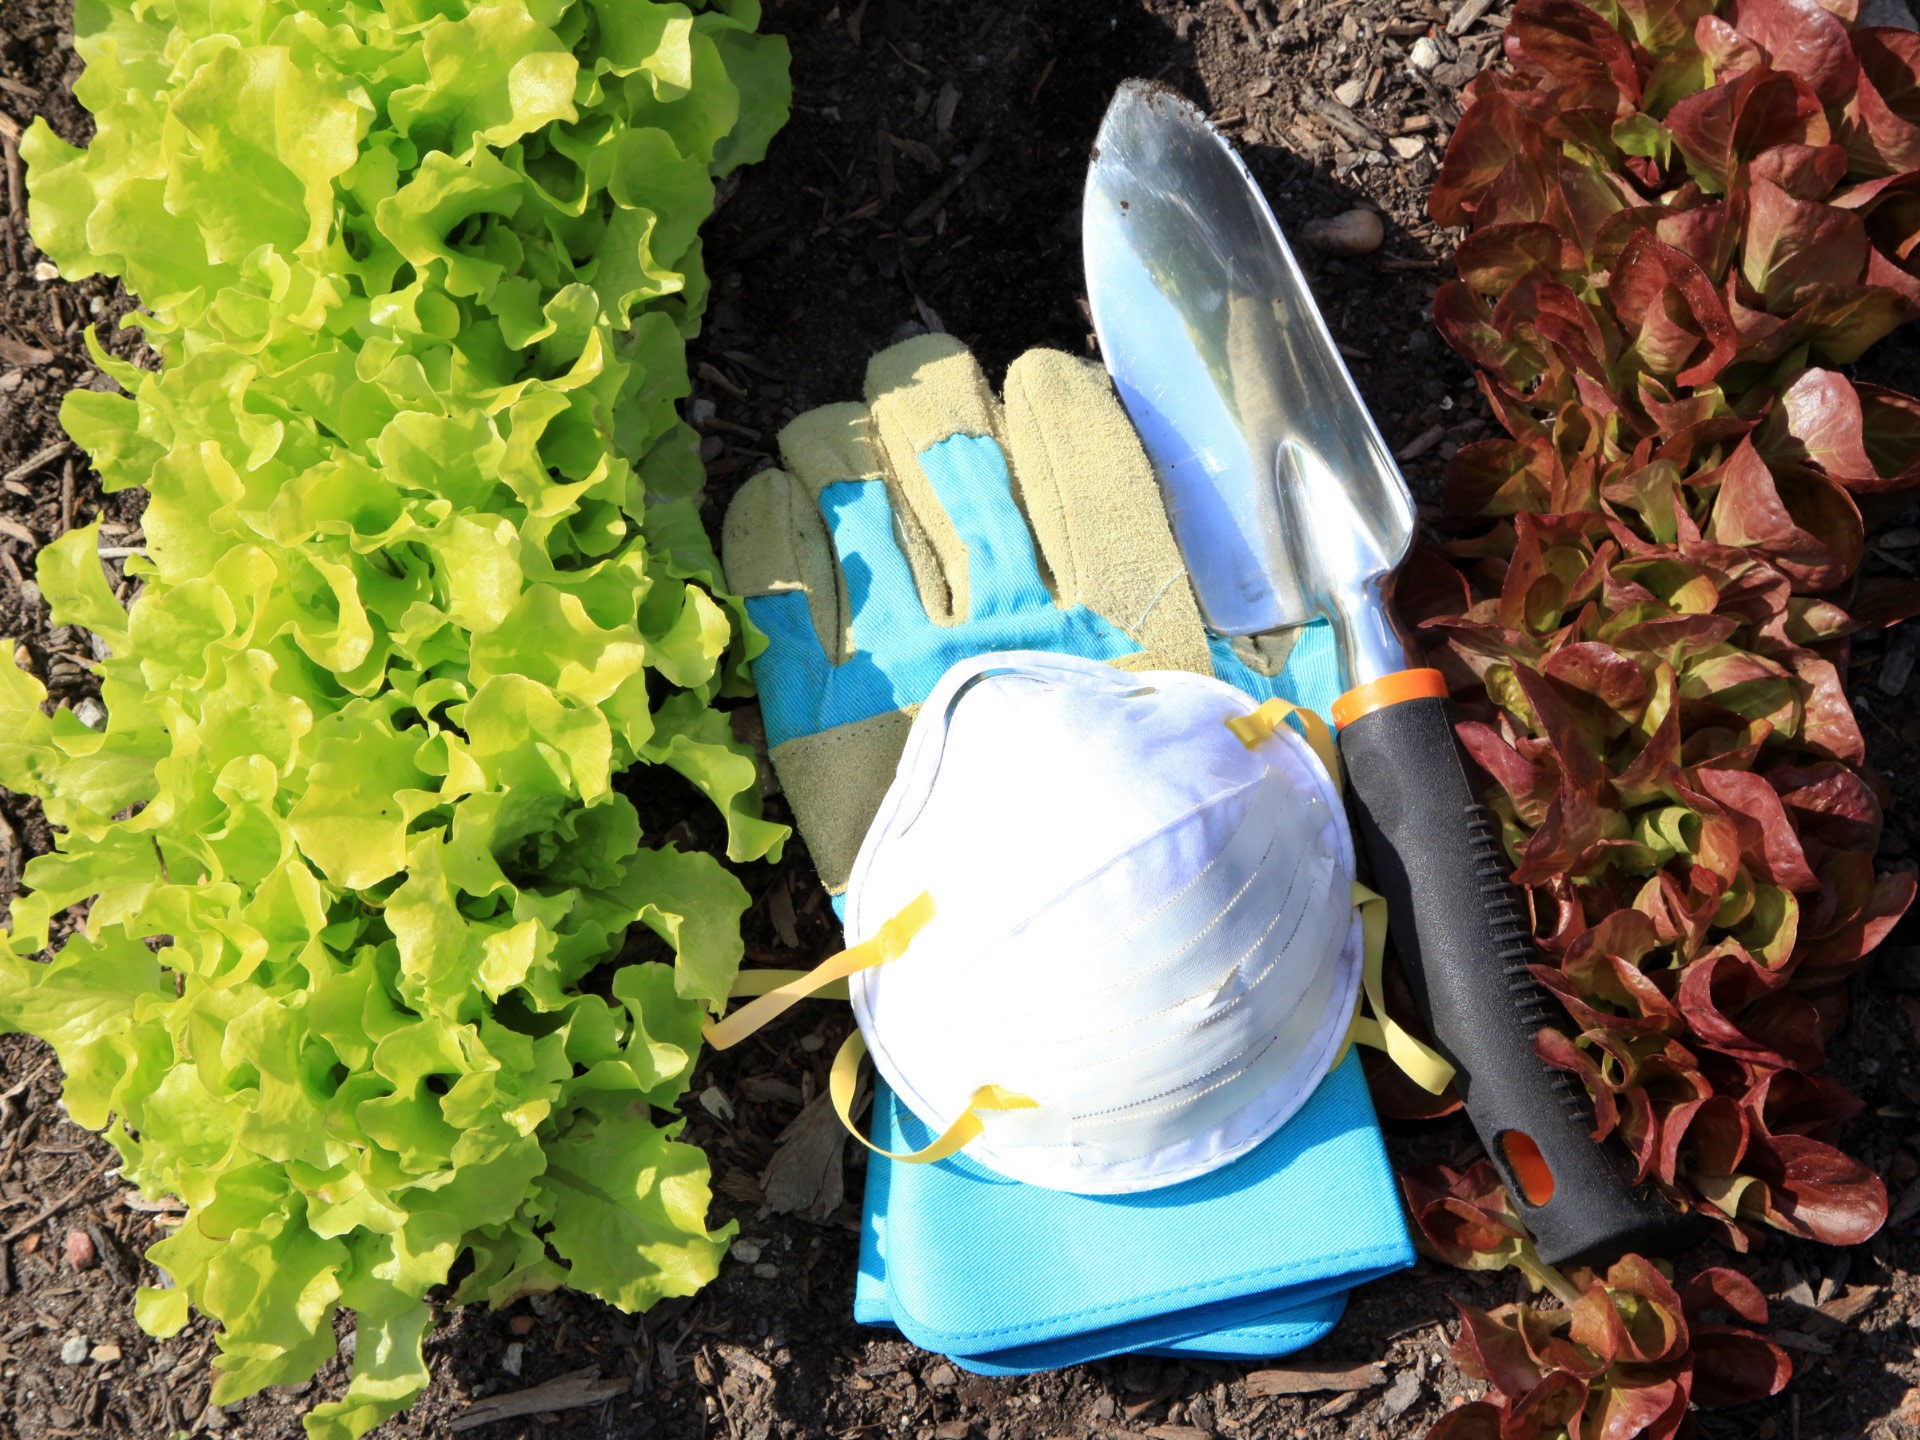 Protect yourself from Legionnaires' Disease when using compost and potting